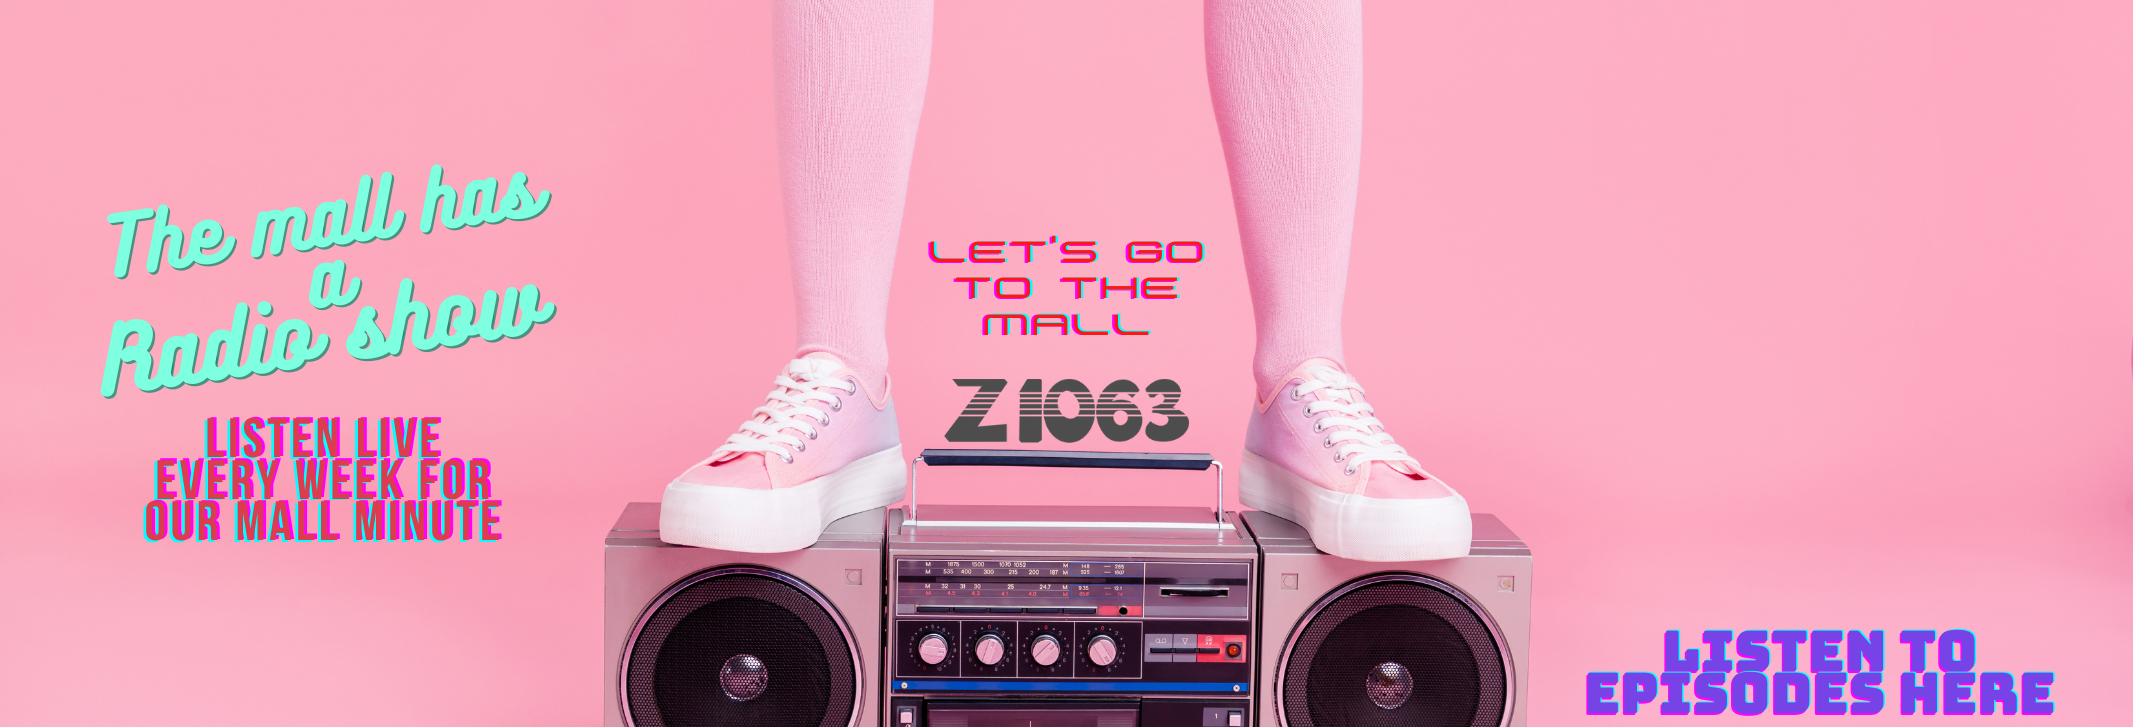 Lets go to the mall 2133 × 727 px